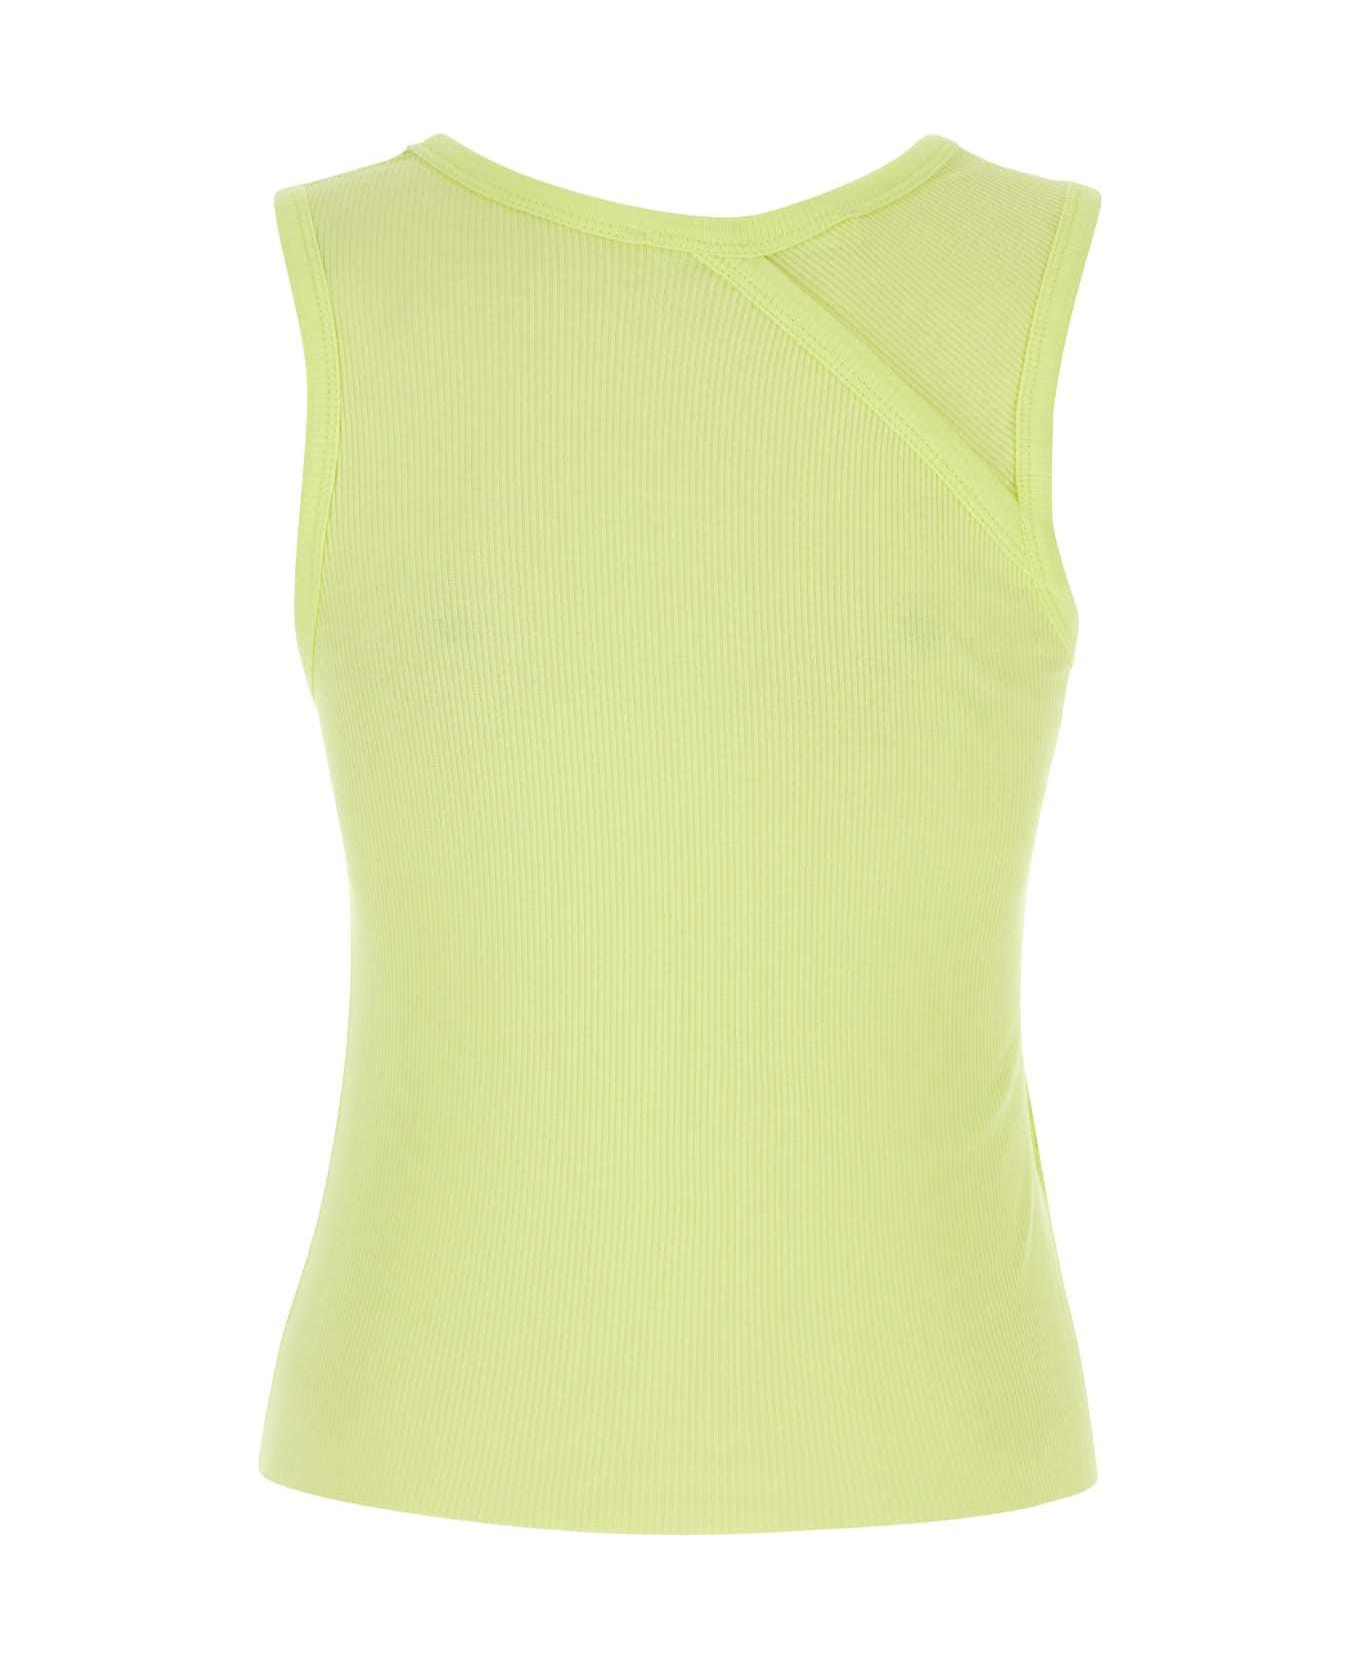 1017 ALYX 9SM Fluo Yellow Cotton T-top - YLW0042